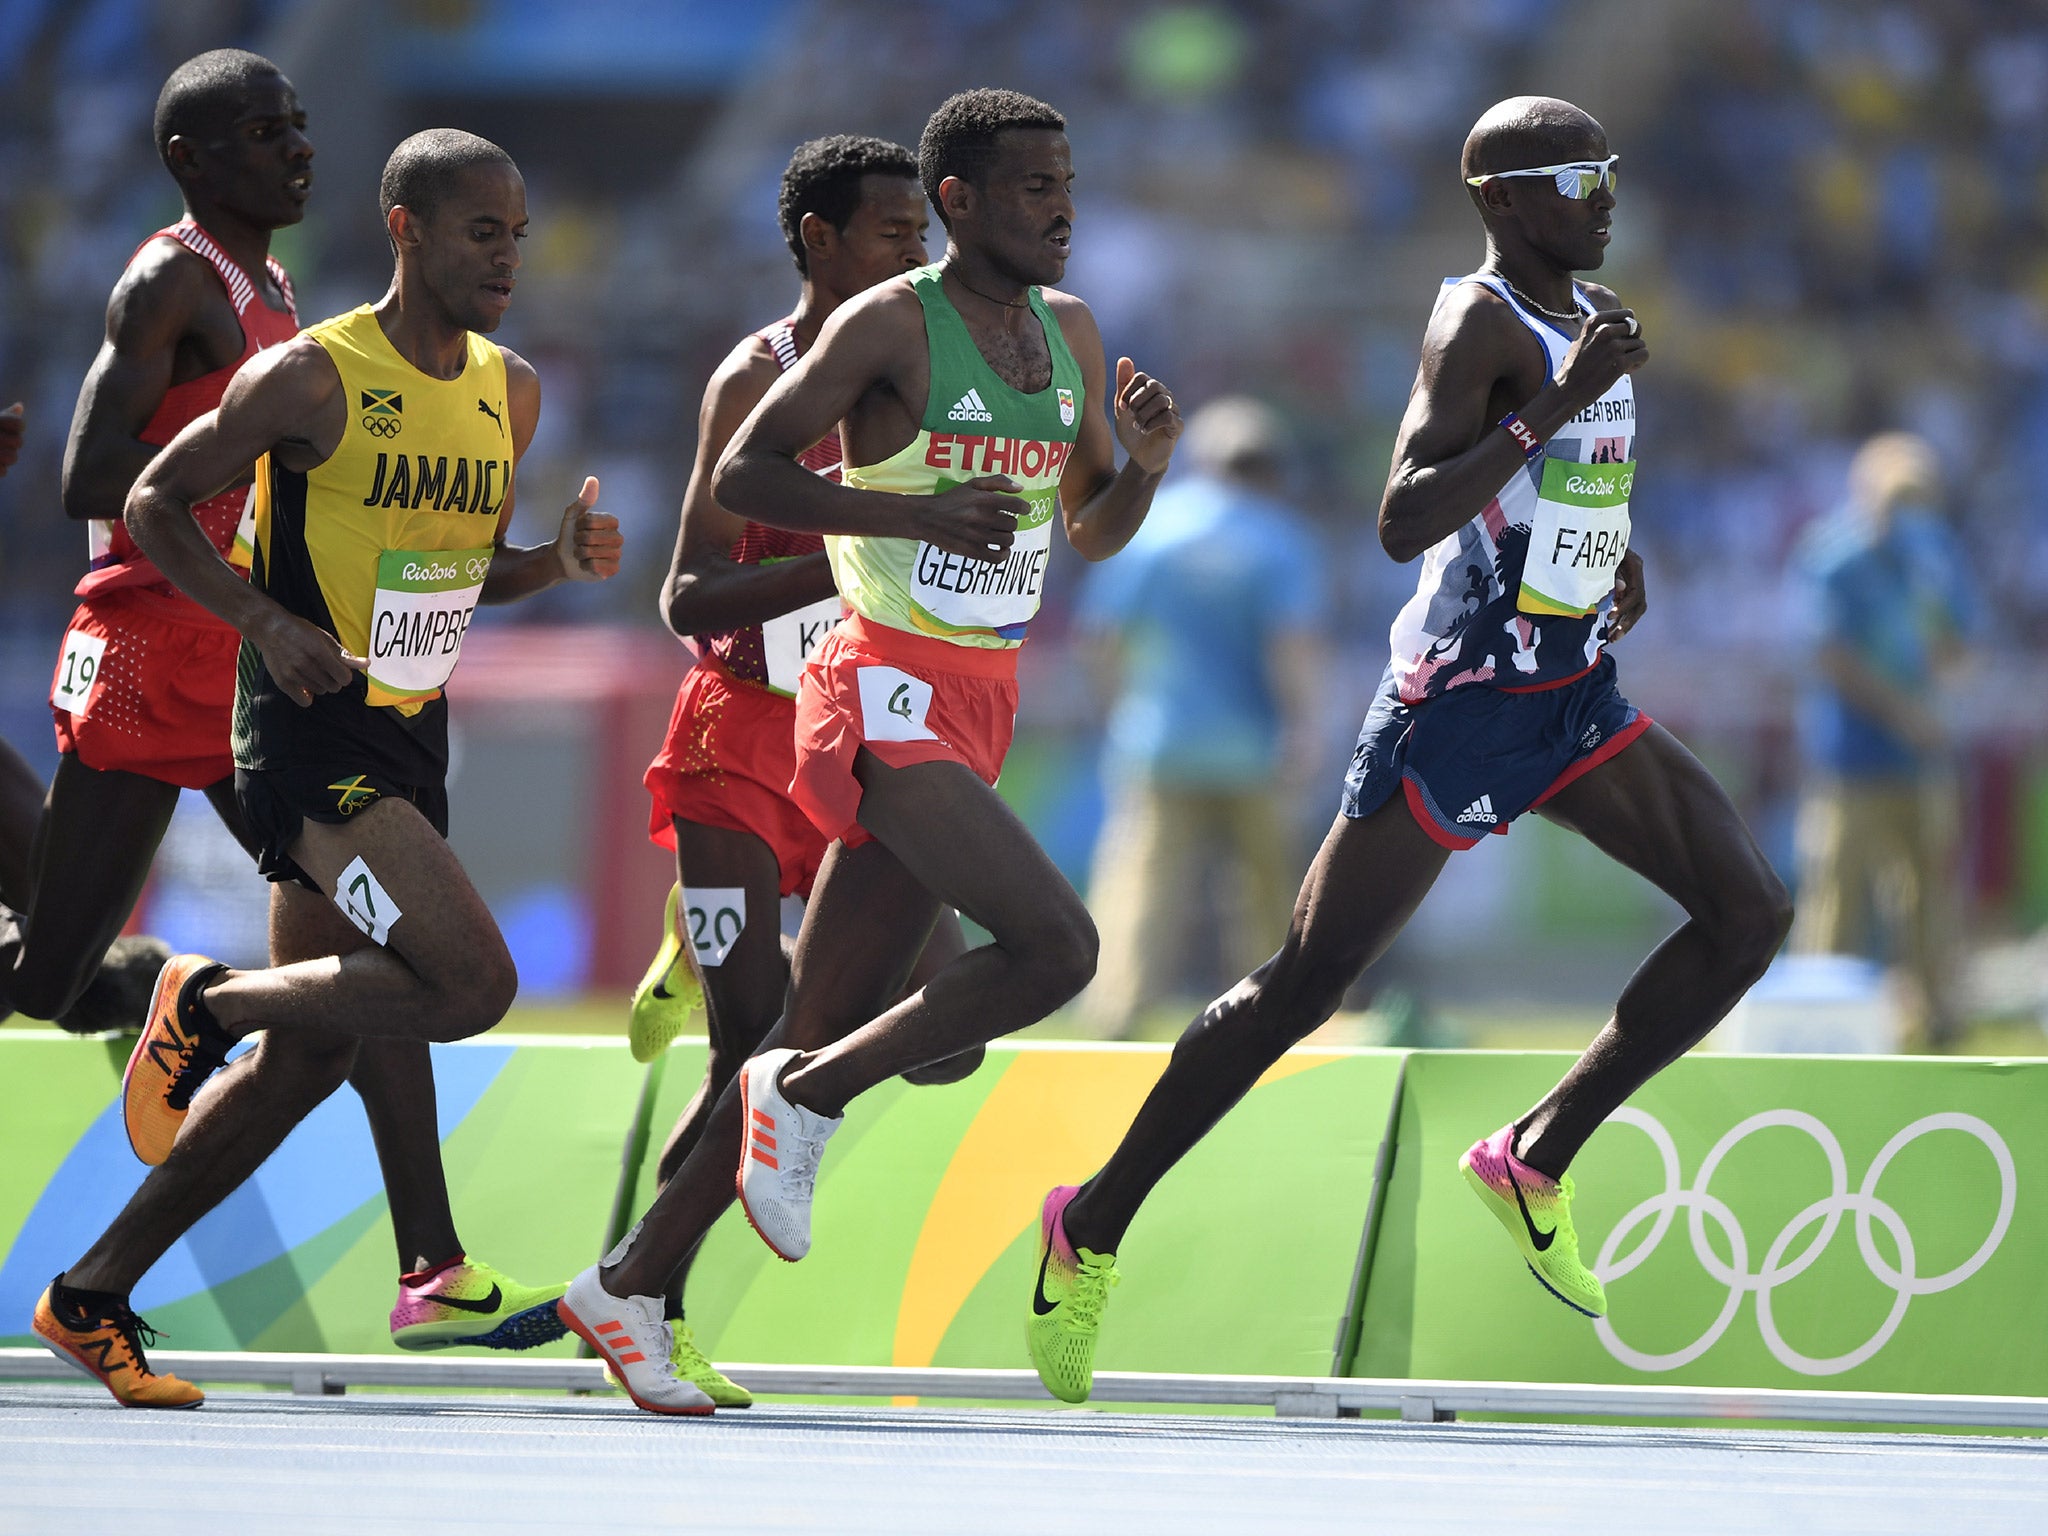 Mo Farah competes in the men's 5,000m final at 01:30 BST